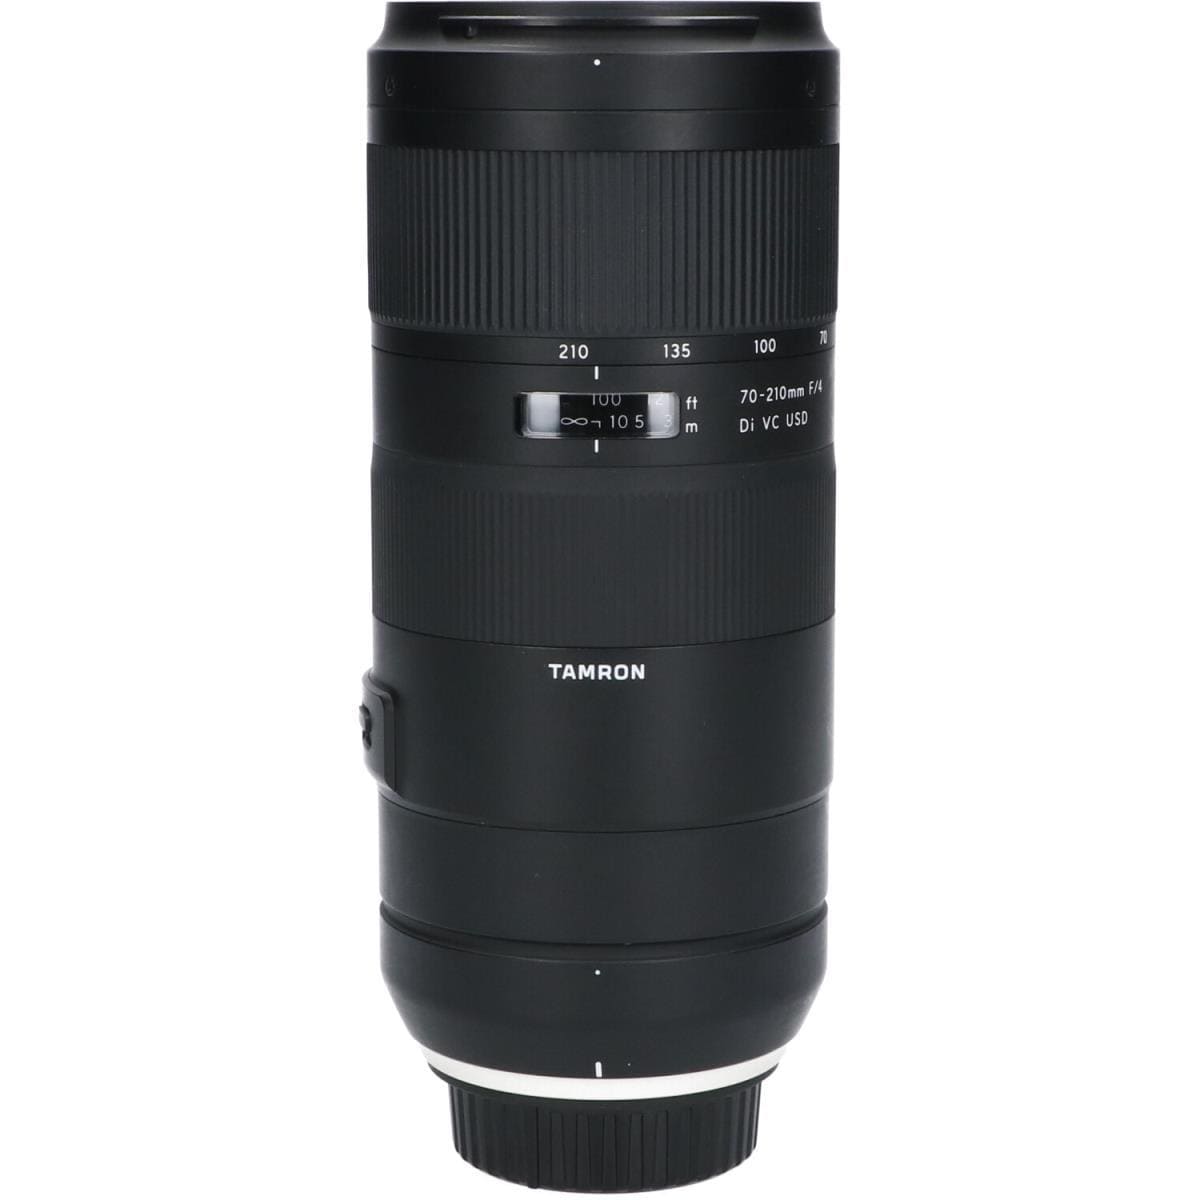 TAMRON ニコン（A034）70?210mm F4DIVCUSD